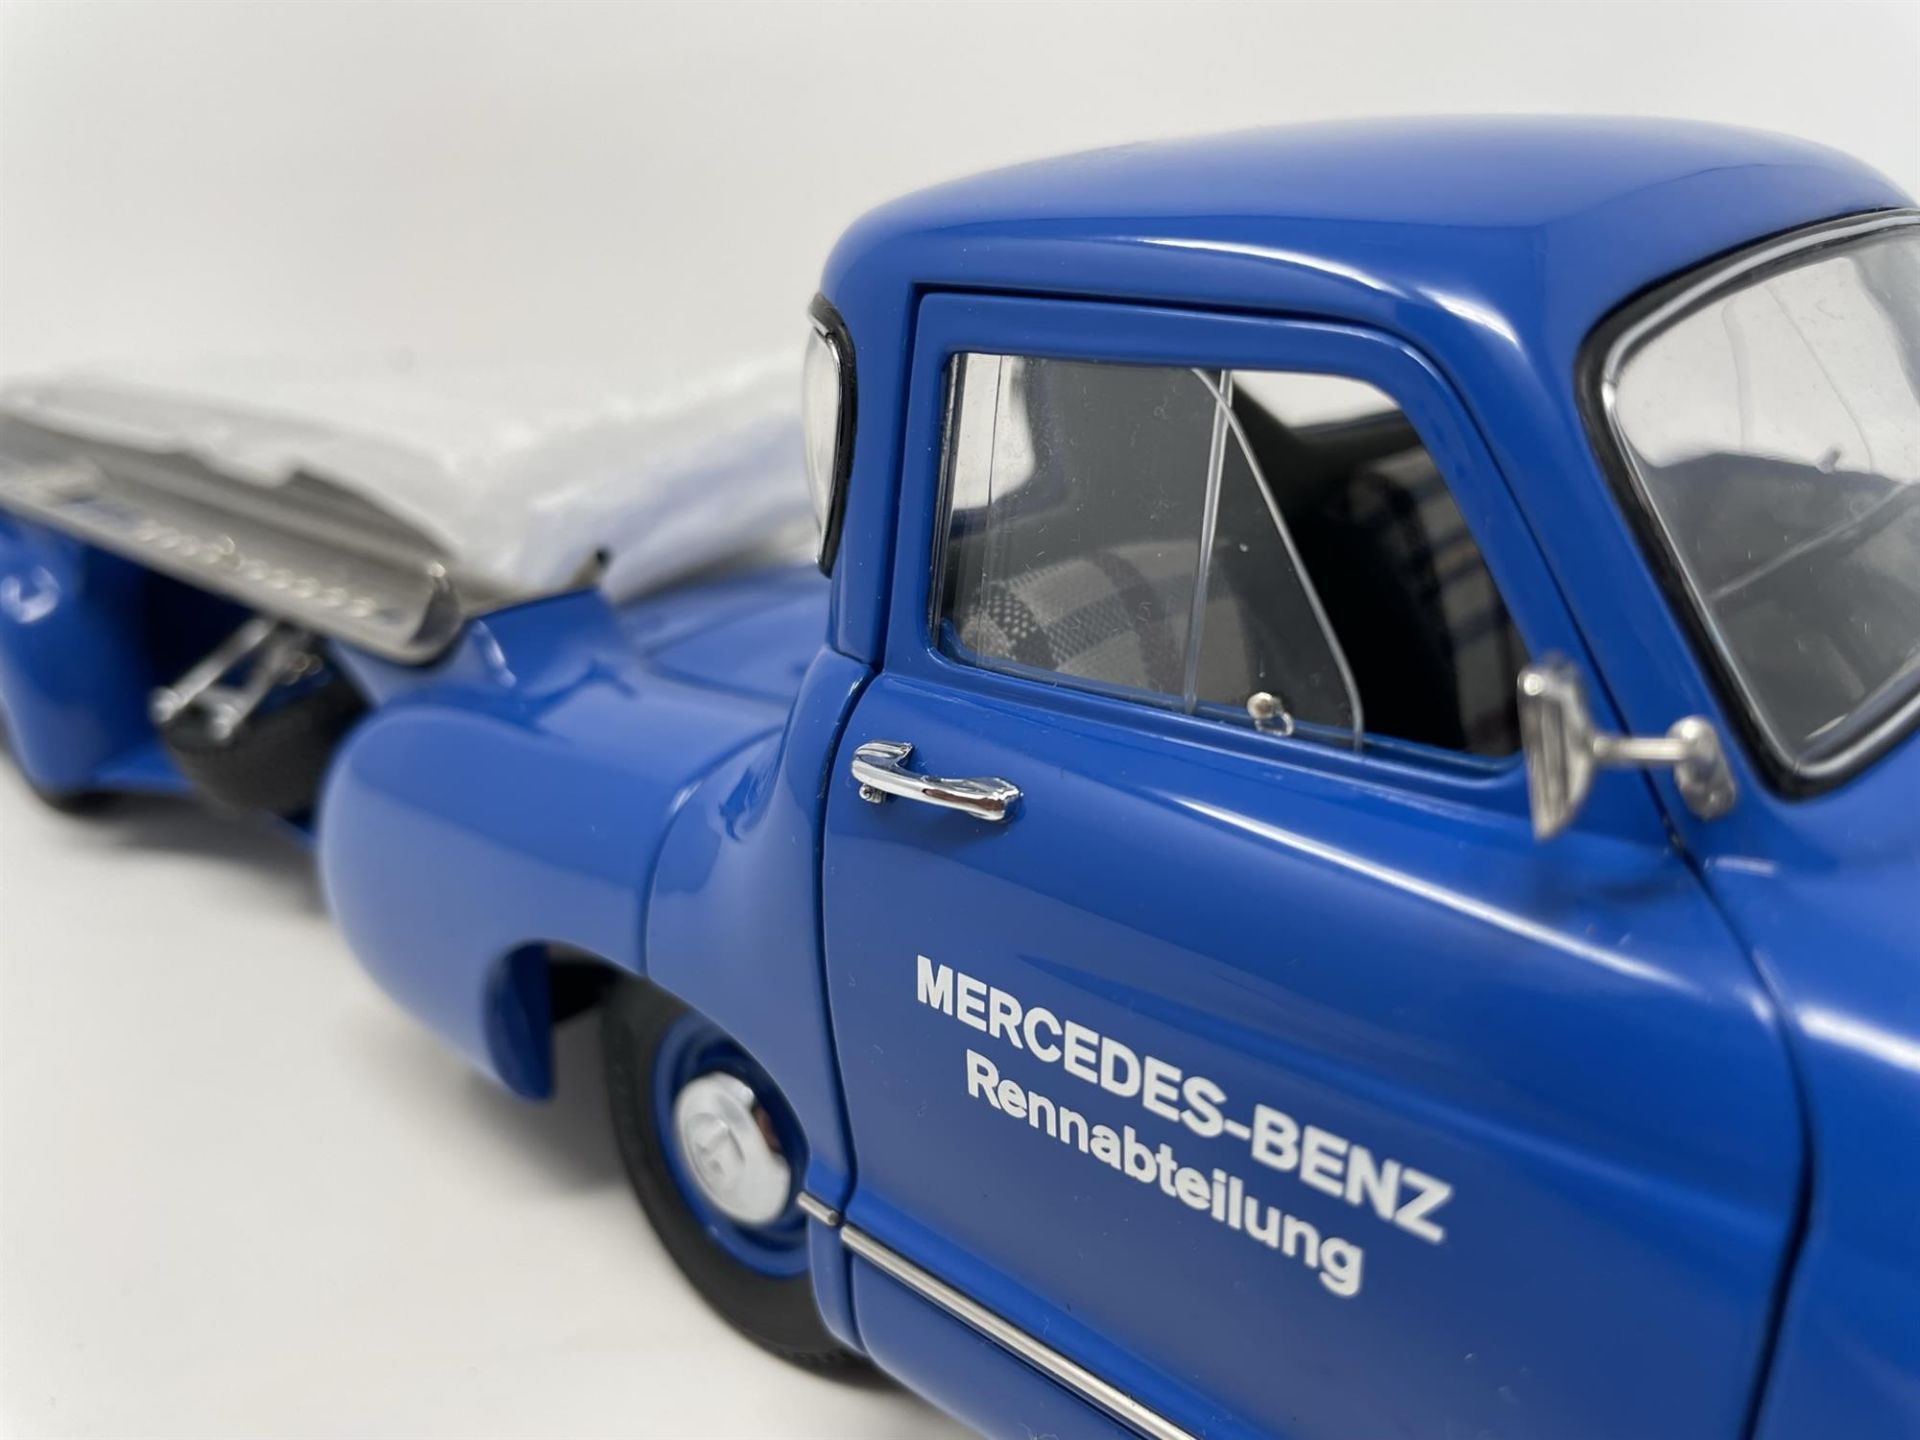 CMC 1954 Mercedes-Benz Renntransporter 1:18th Scale Model - Image 10 of 10